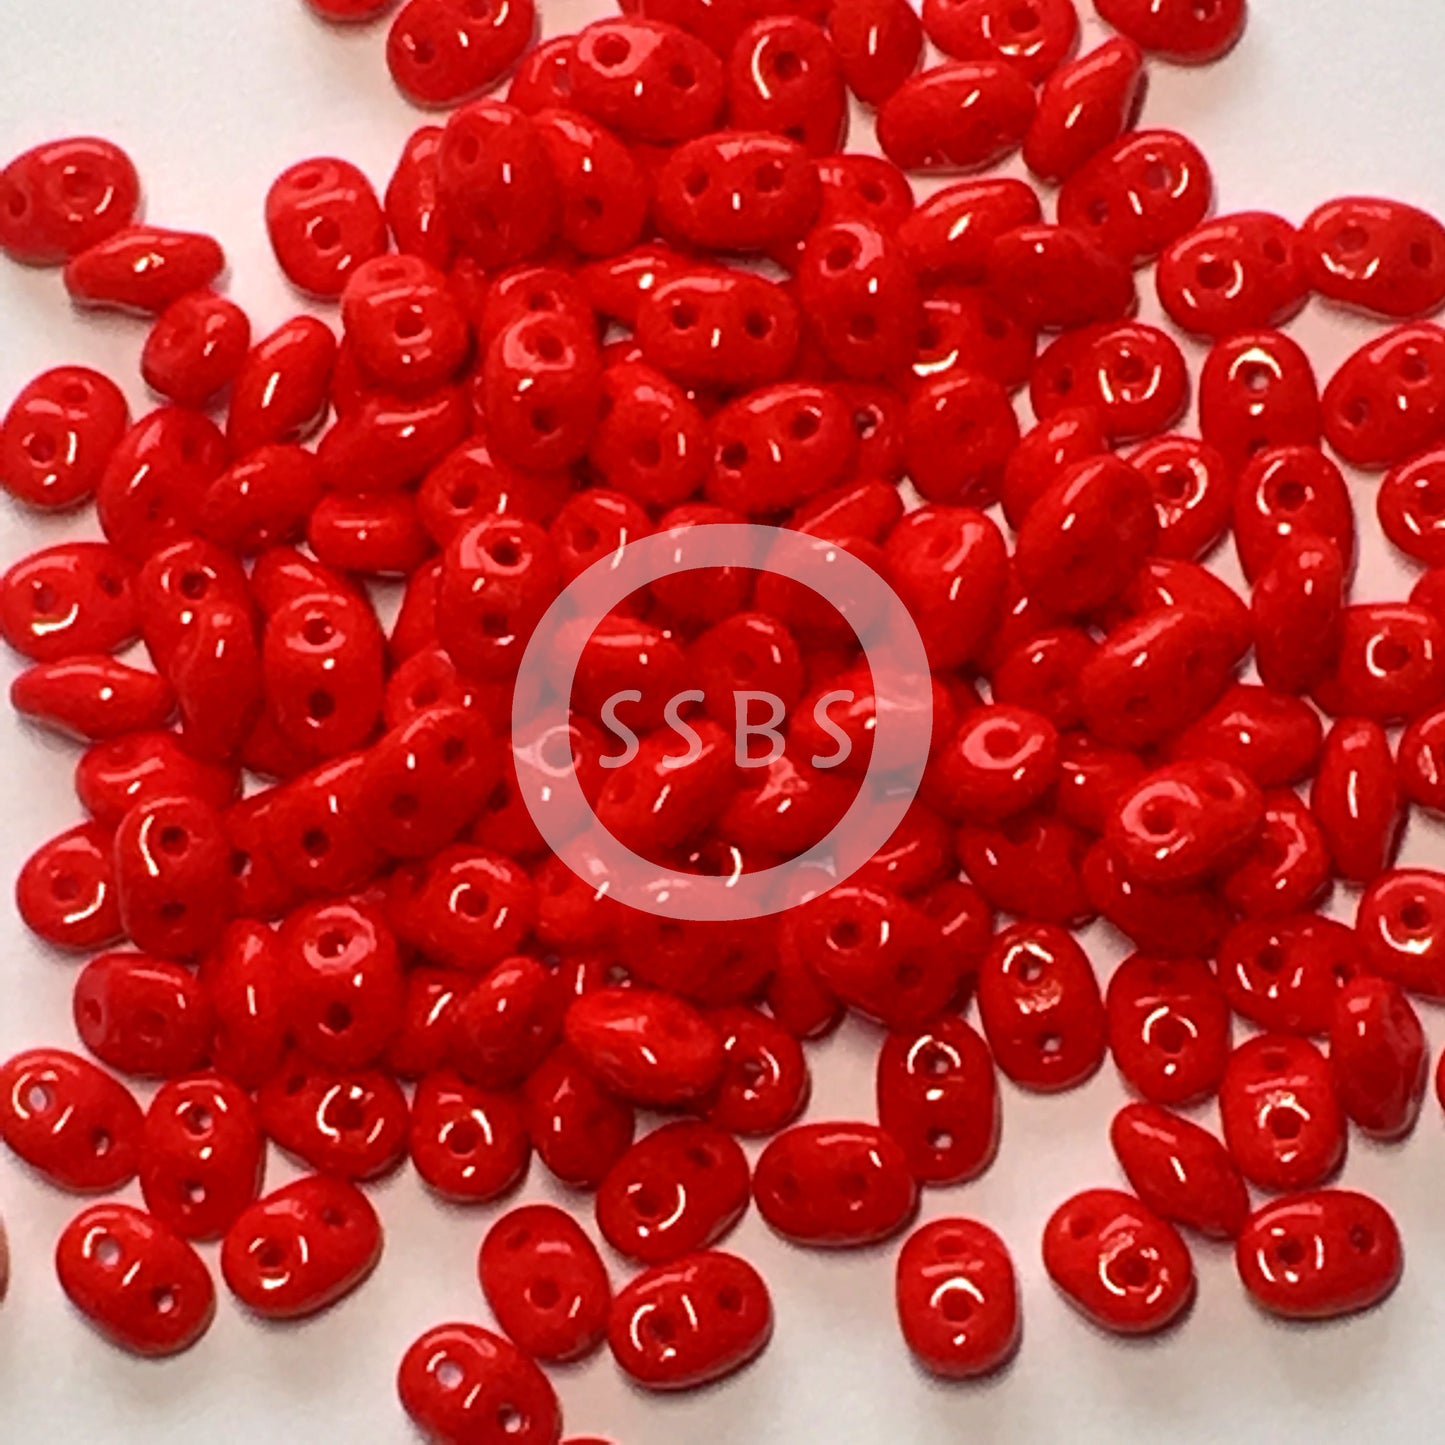 Matubo Superduo 2.5 x 5 mm 93200  Opaque Coral Red Beads - 5 or 10 gm